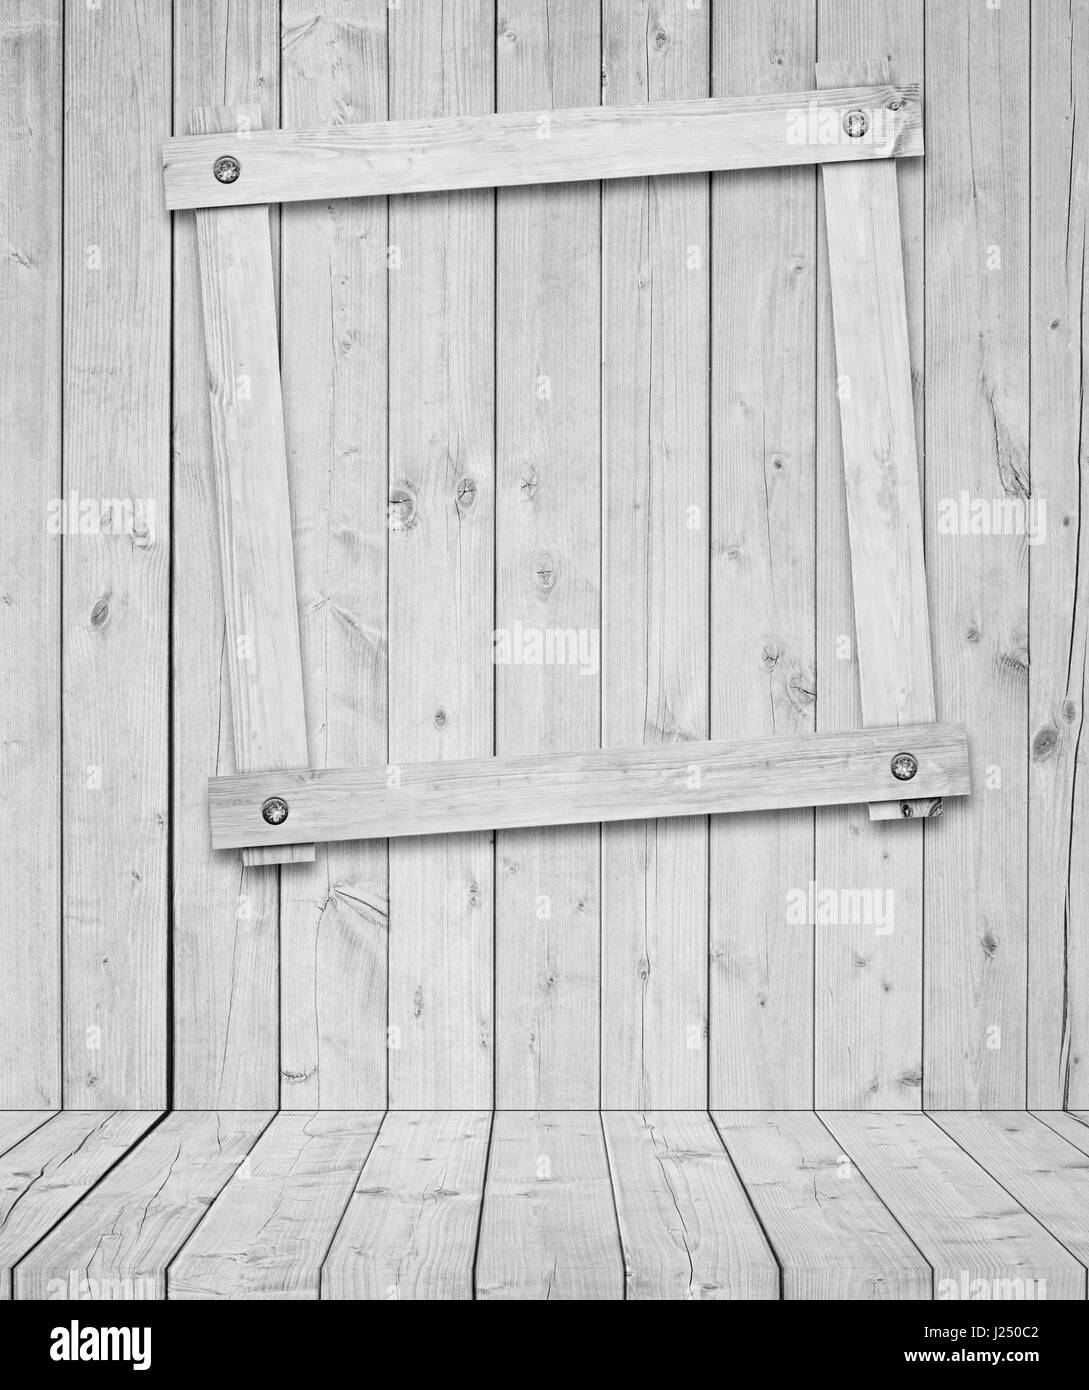 Light gray wooden planks, floors and frame attached to the wall Stock Photo